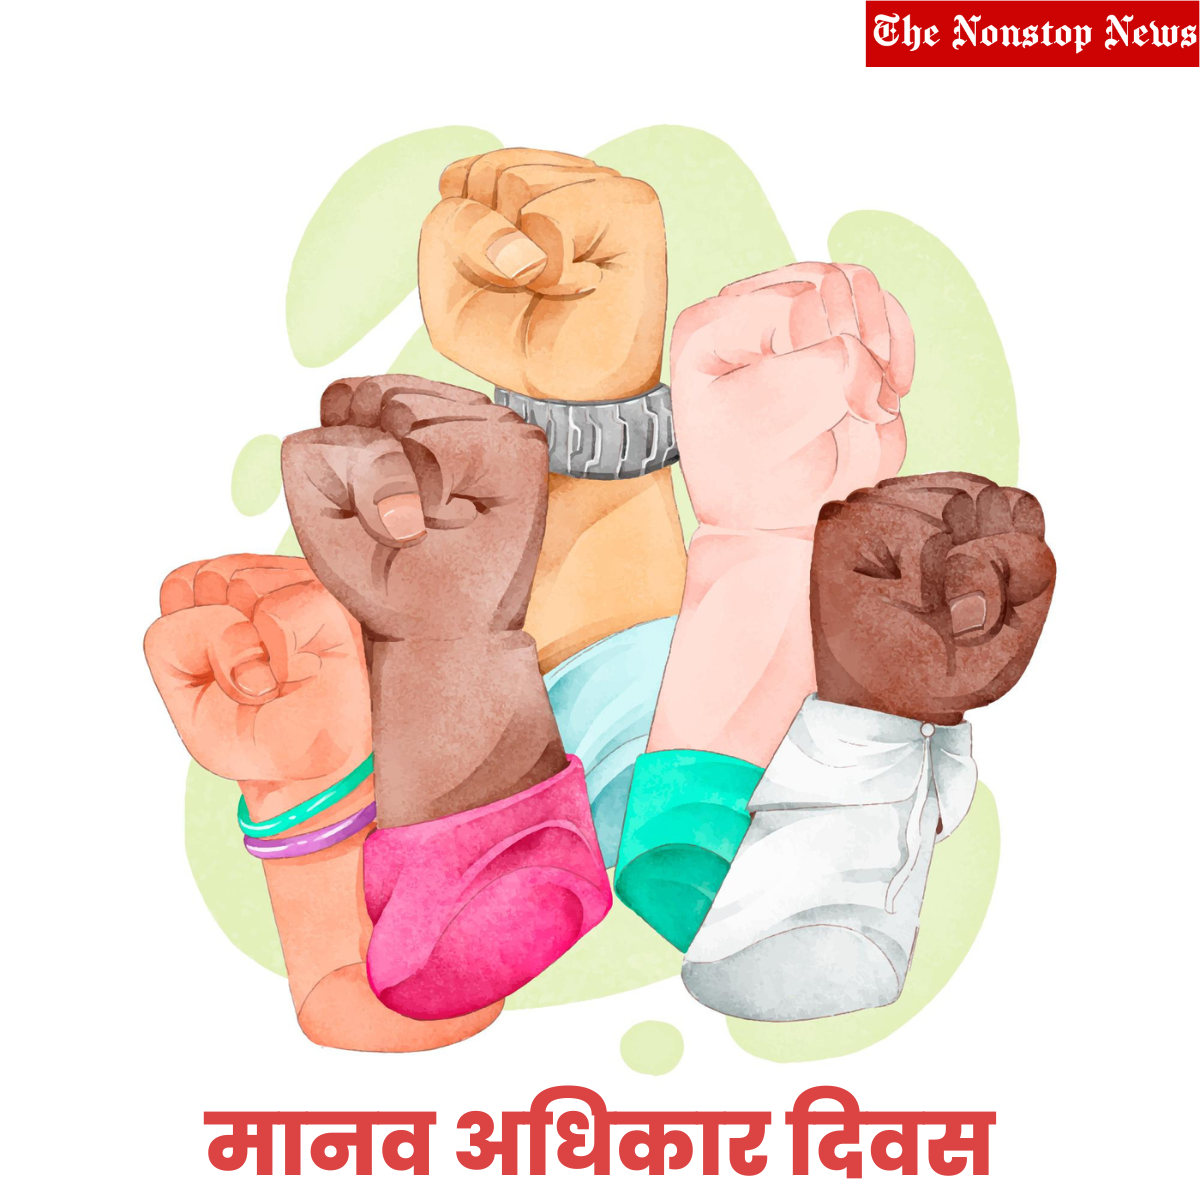 Human Rights Day 2022 Wishes in Hindi, Messages, Greetings, Posters, Quotes, Banners, and HD Images